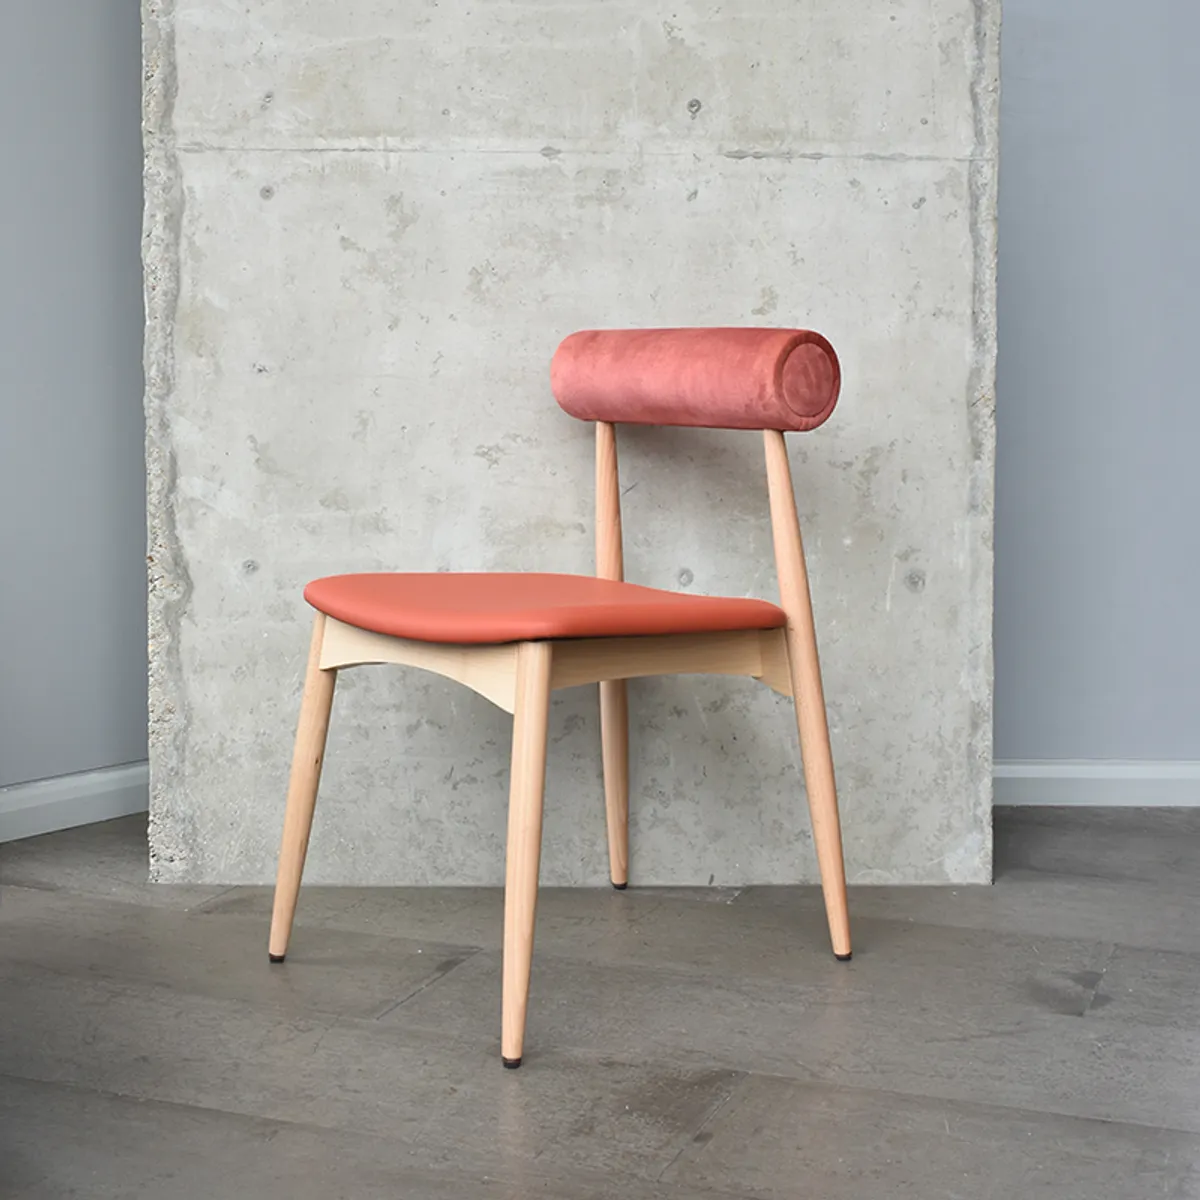 Rolla Side Chair New Furniture From Milan 2019 By Inside Out Contracts 040